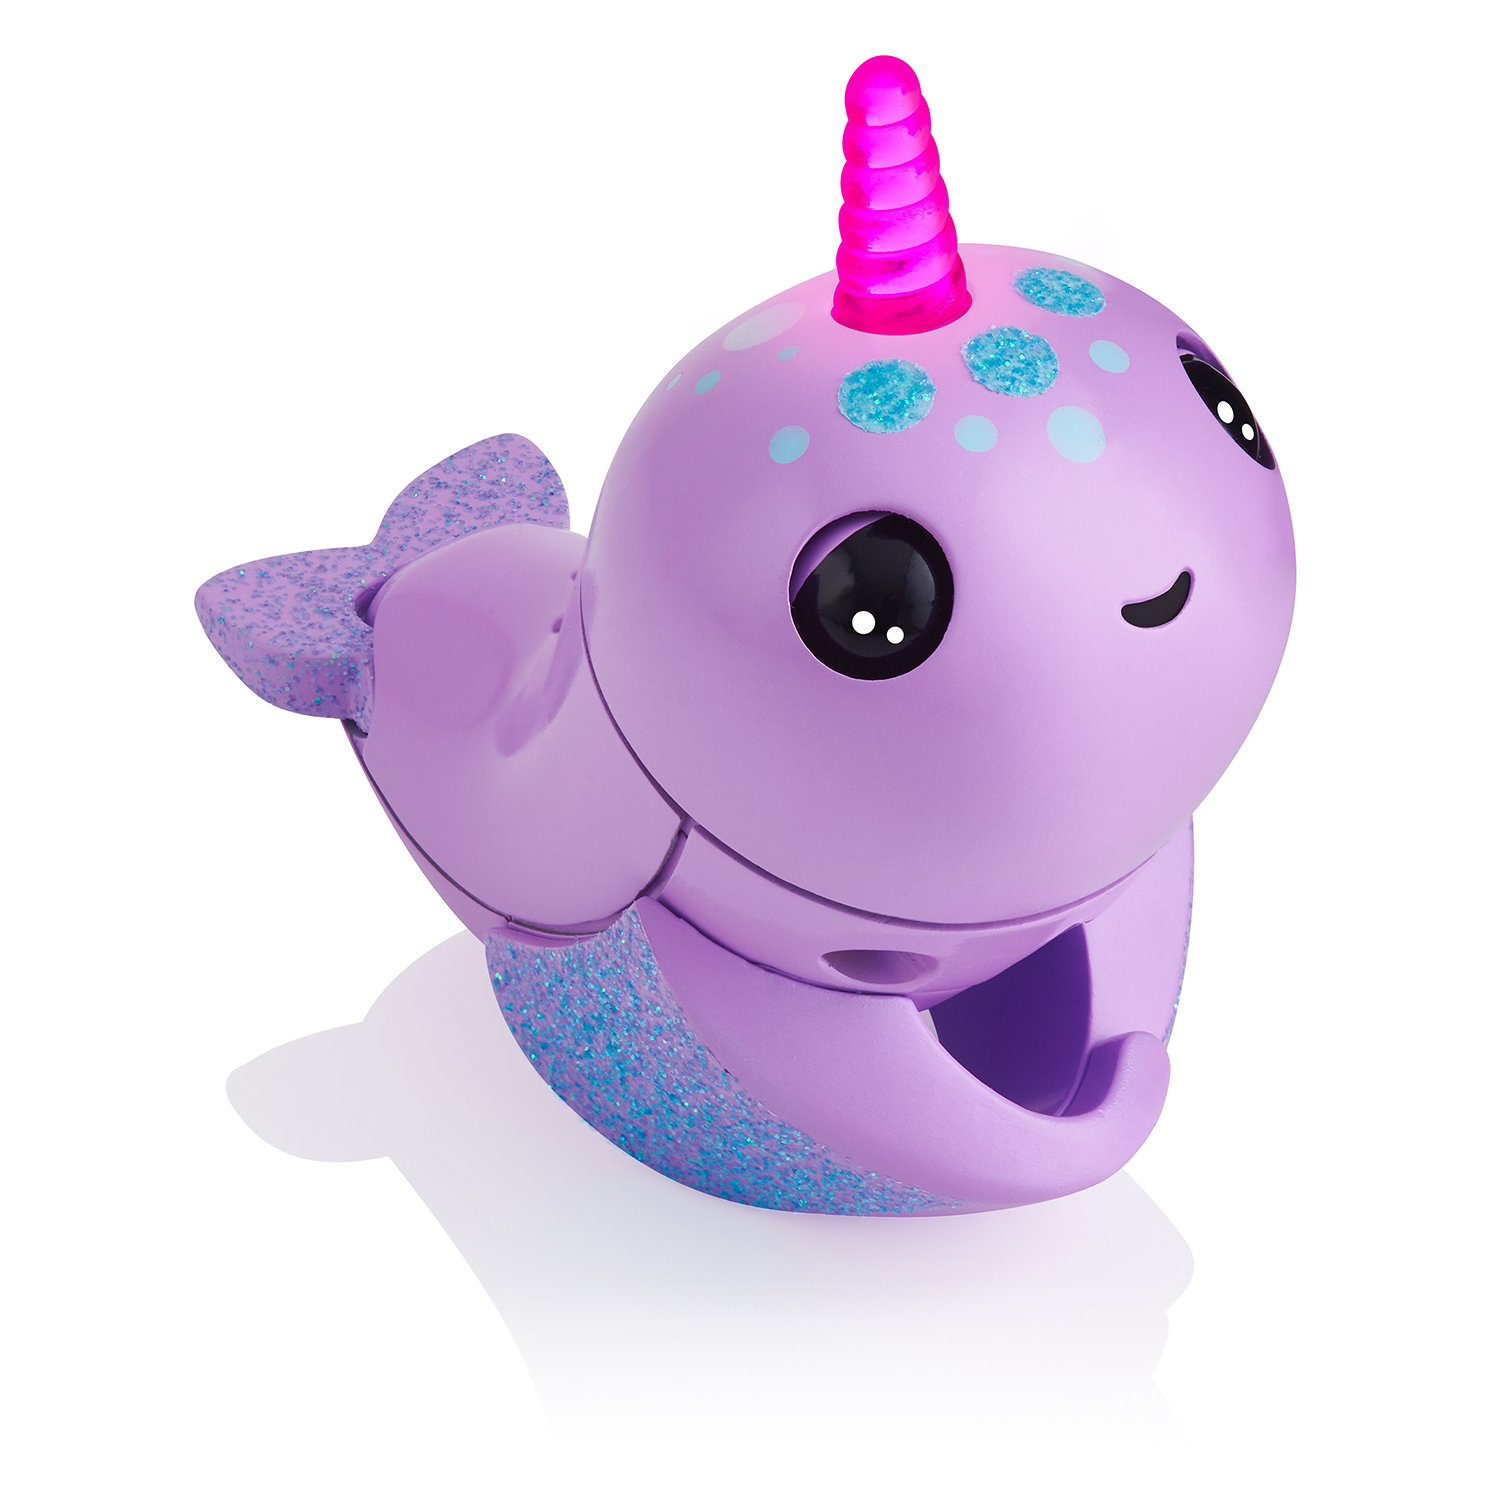 Fingerlings Light Up Narwhal - Nelly (Purple) - Friendly Interactive Toy by WowWee - image 5 of 10